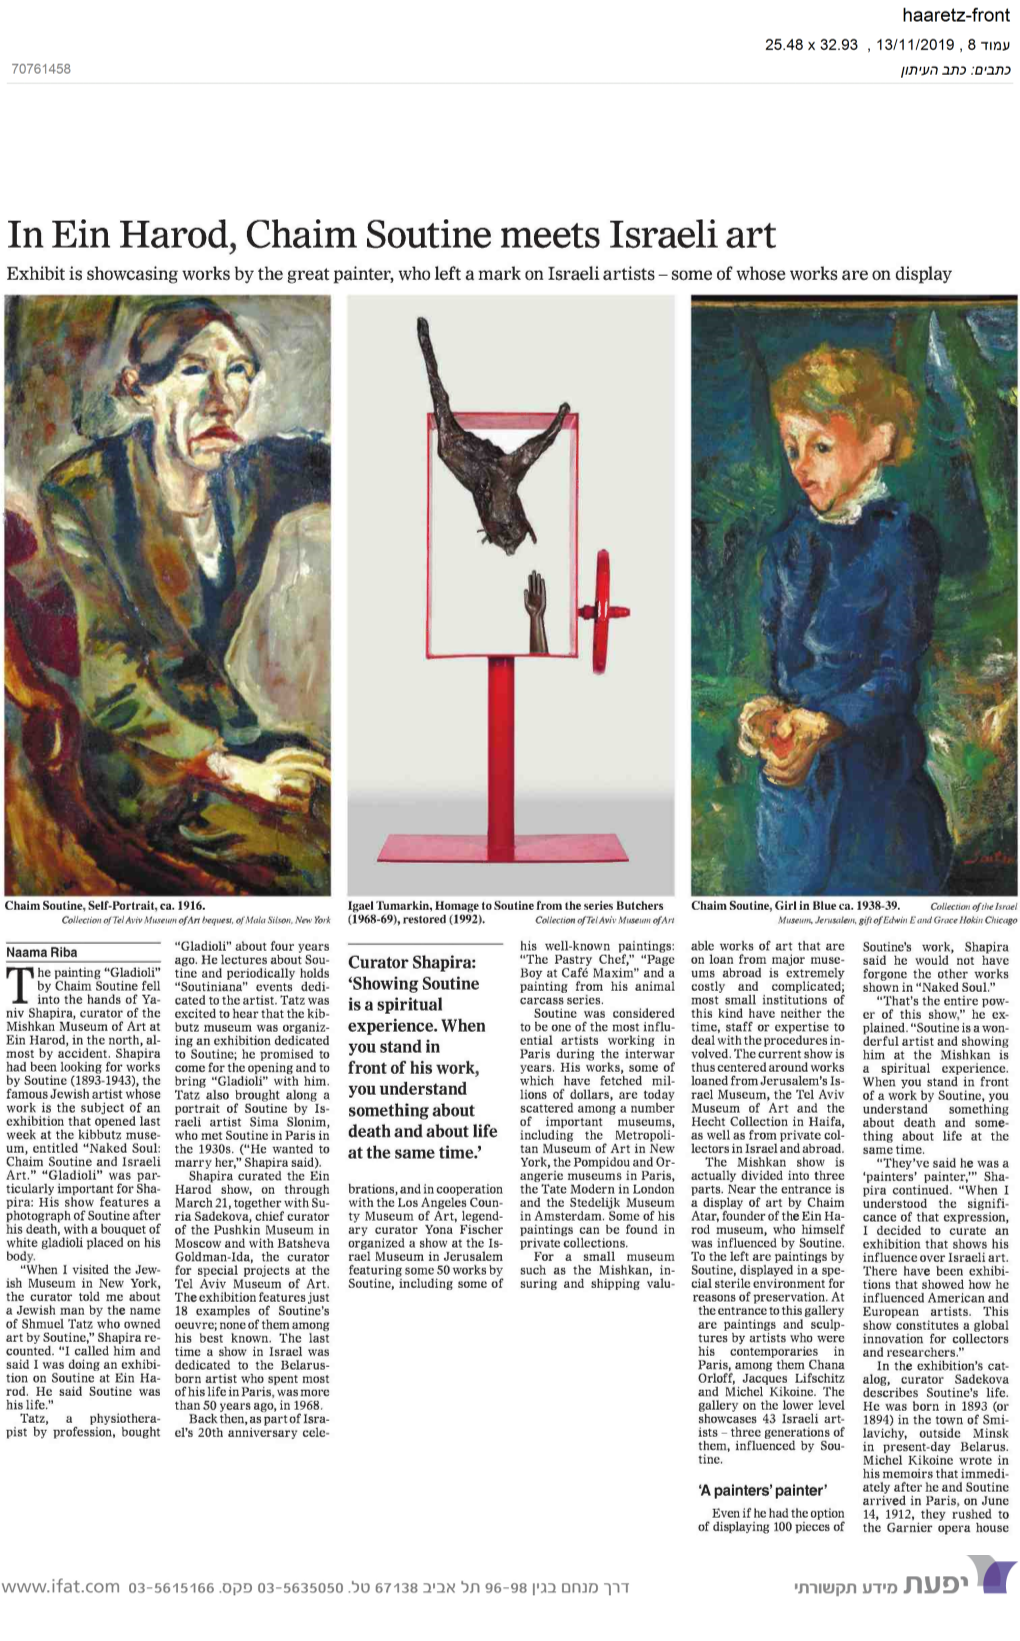 In Ein Harod,Chaim Soutine Meets Israeliart Exhibit Isshowcasingworks by the Greatpainter,Who Left Mark on Israeliartists Some of Whose Works Are on Display